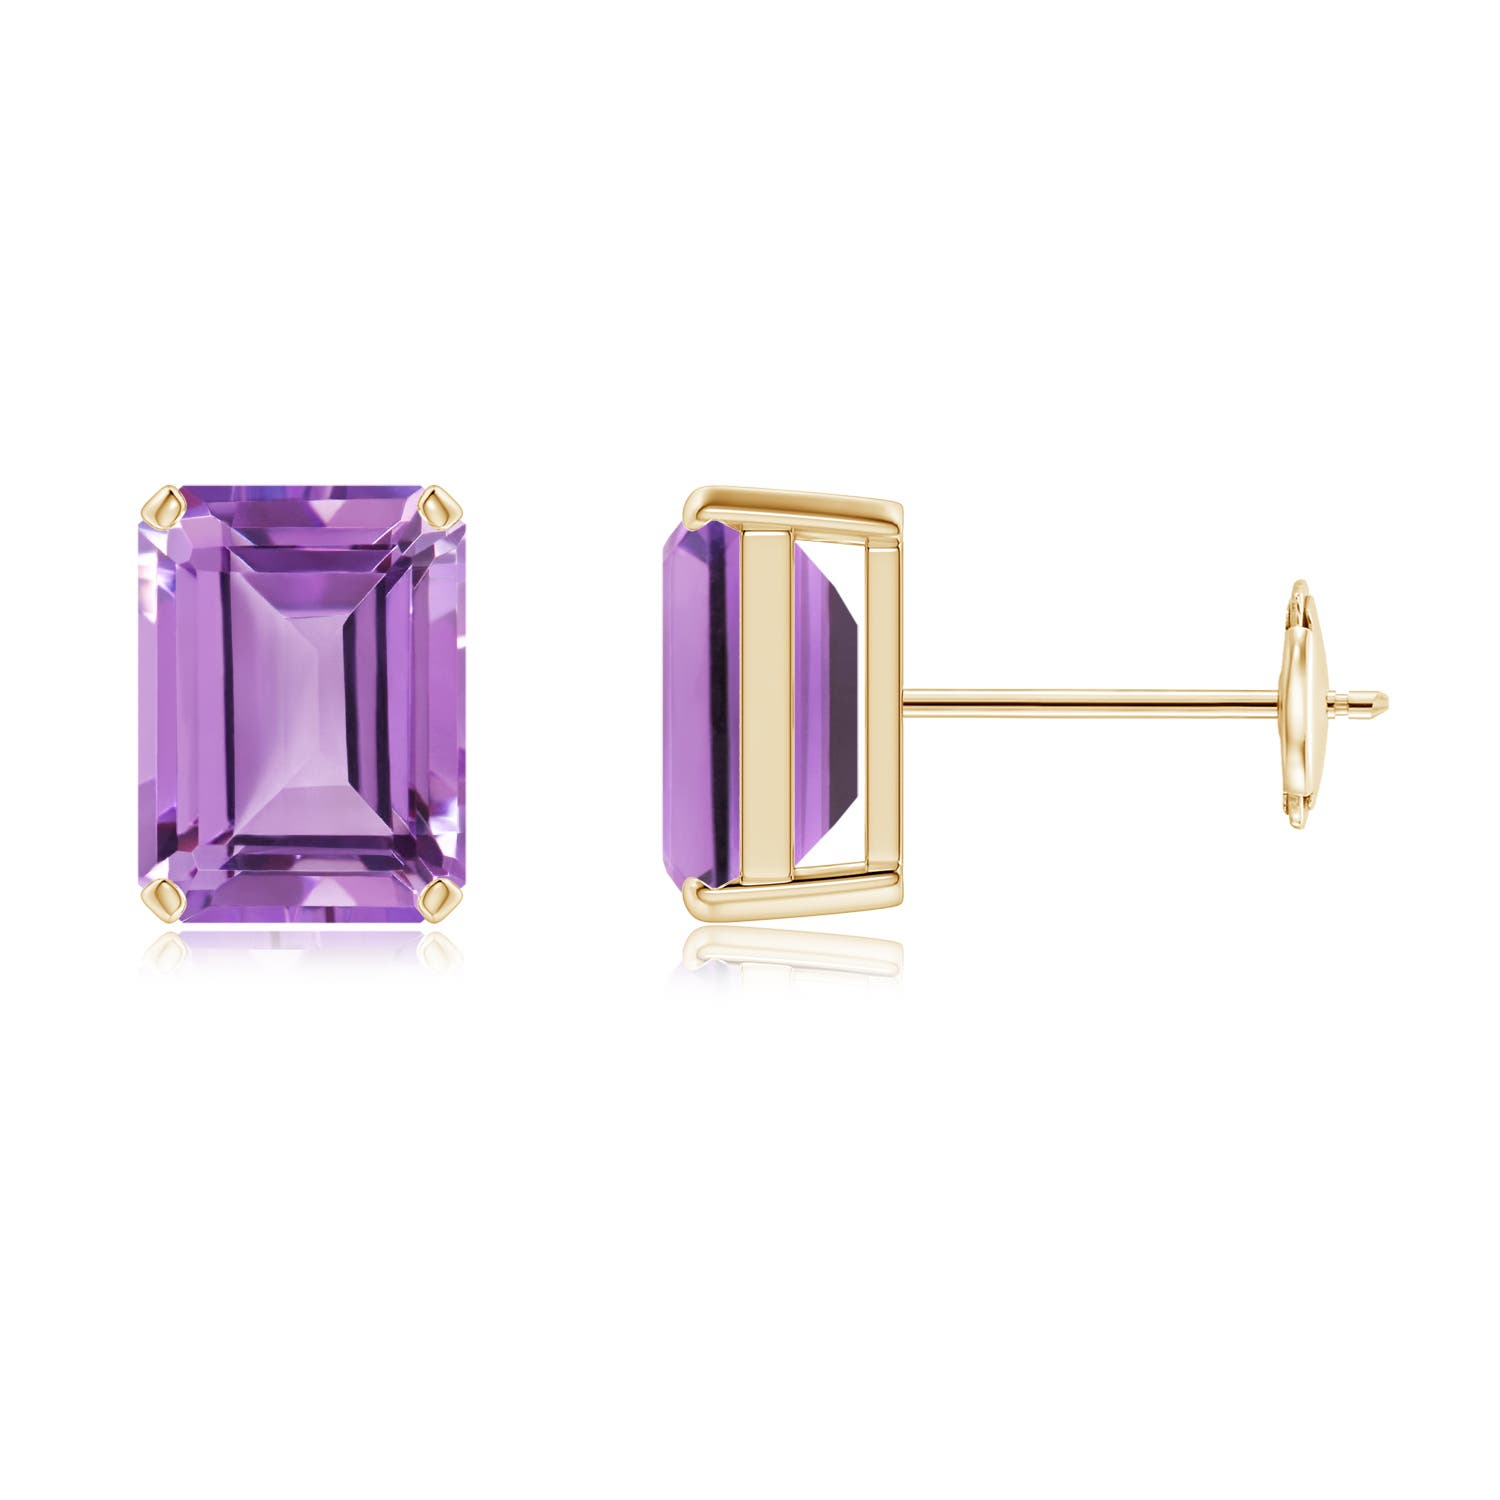 A - Amethyst / 3 CT / 14 KT Yellow Gold